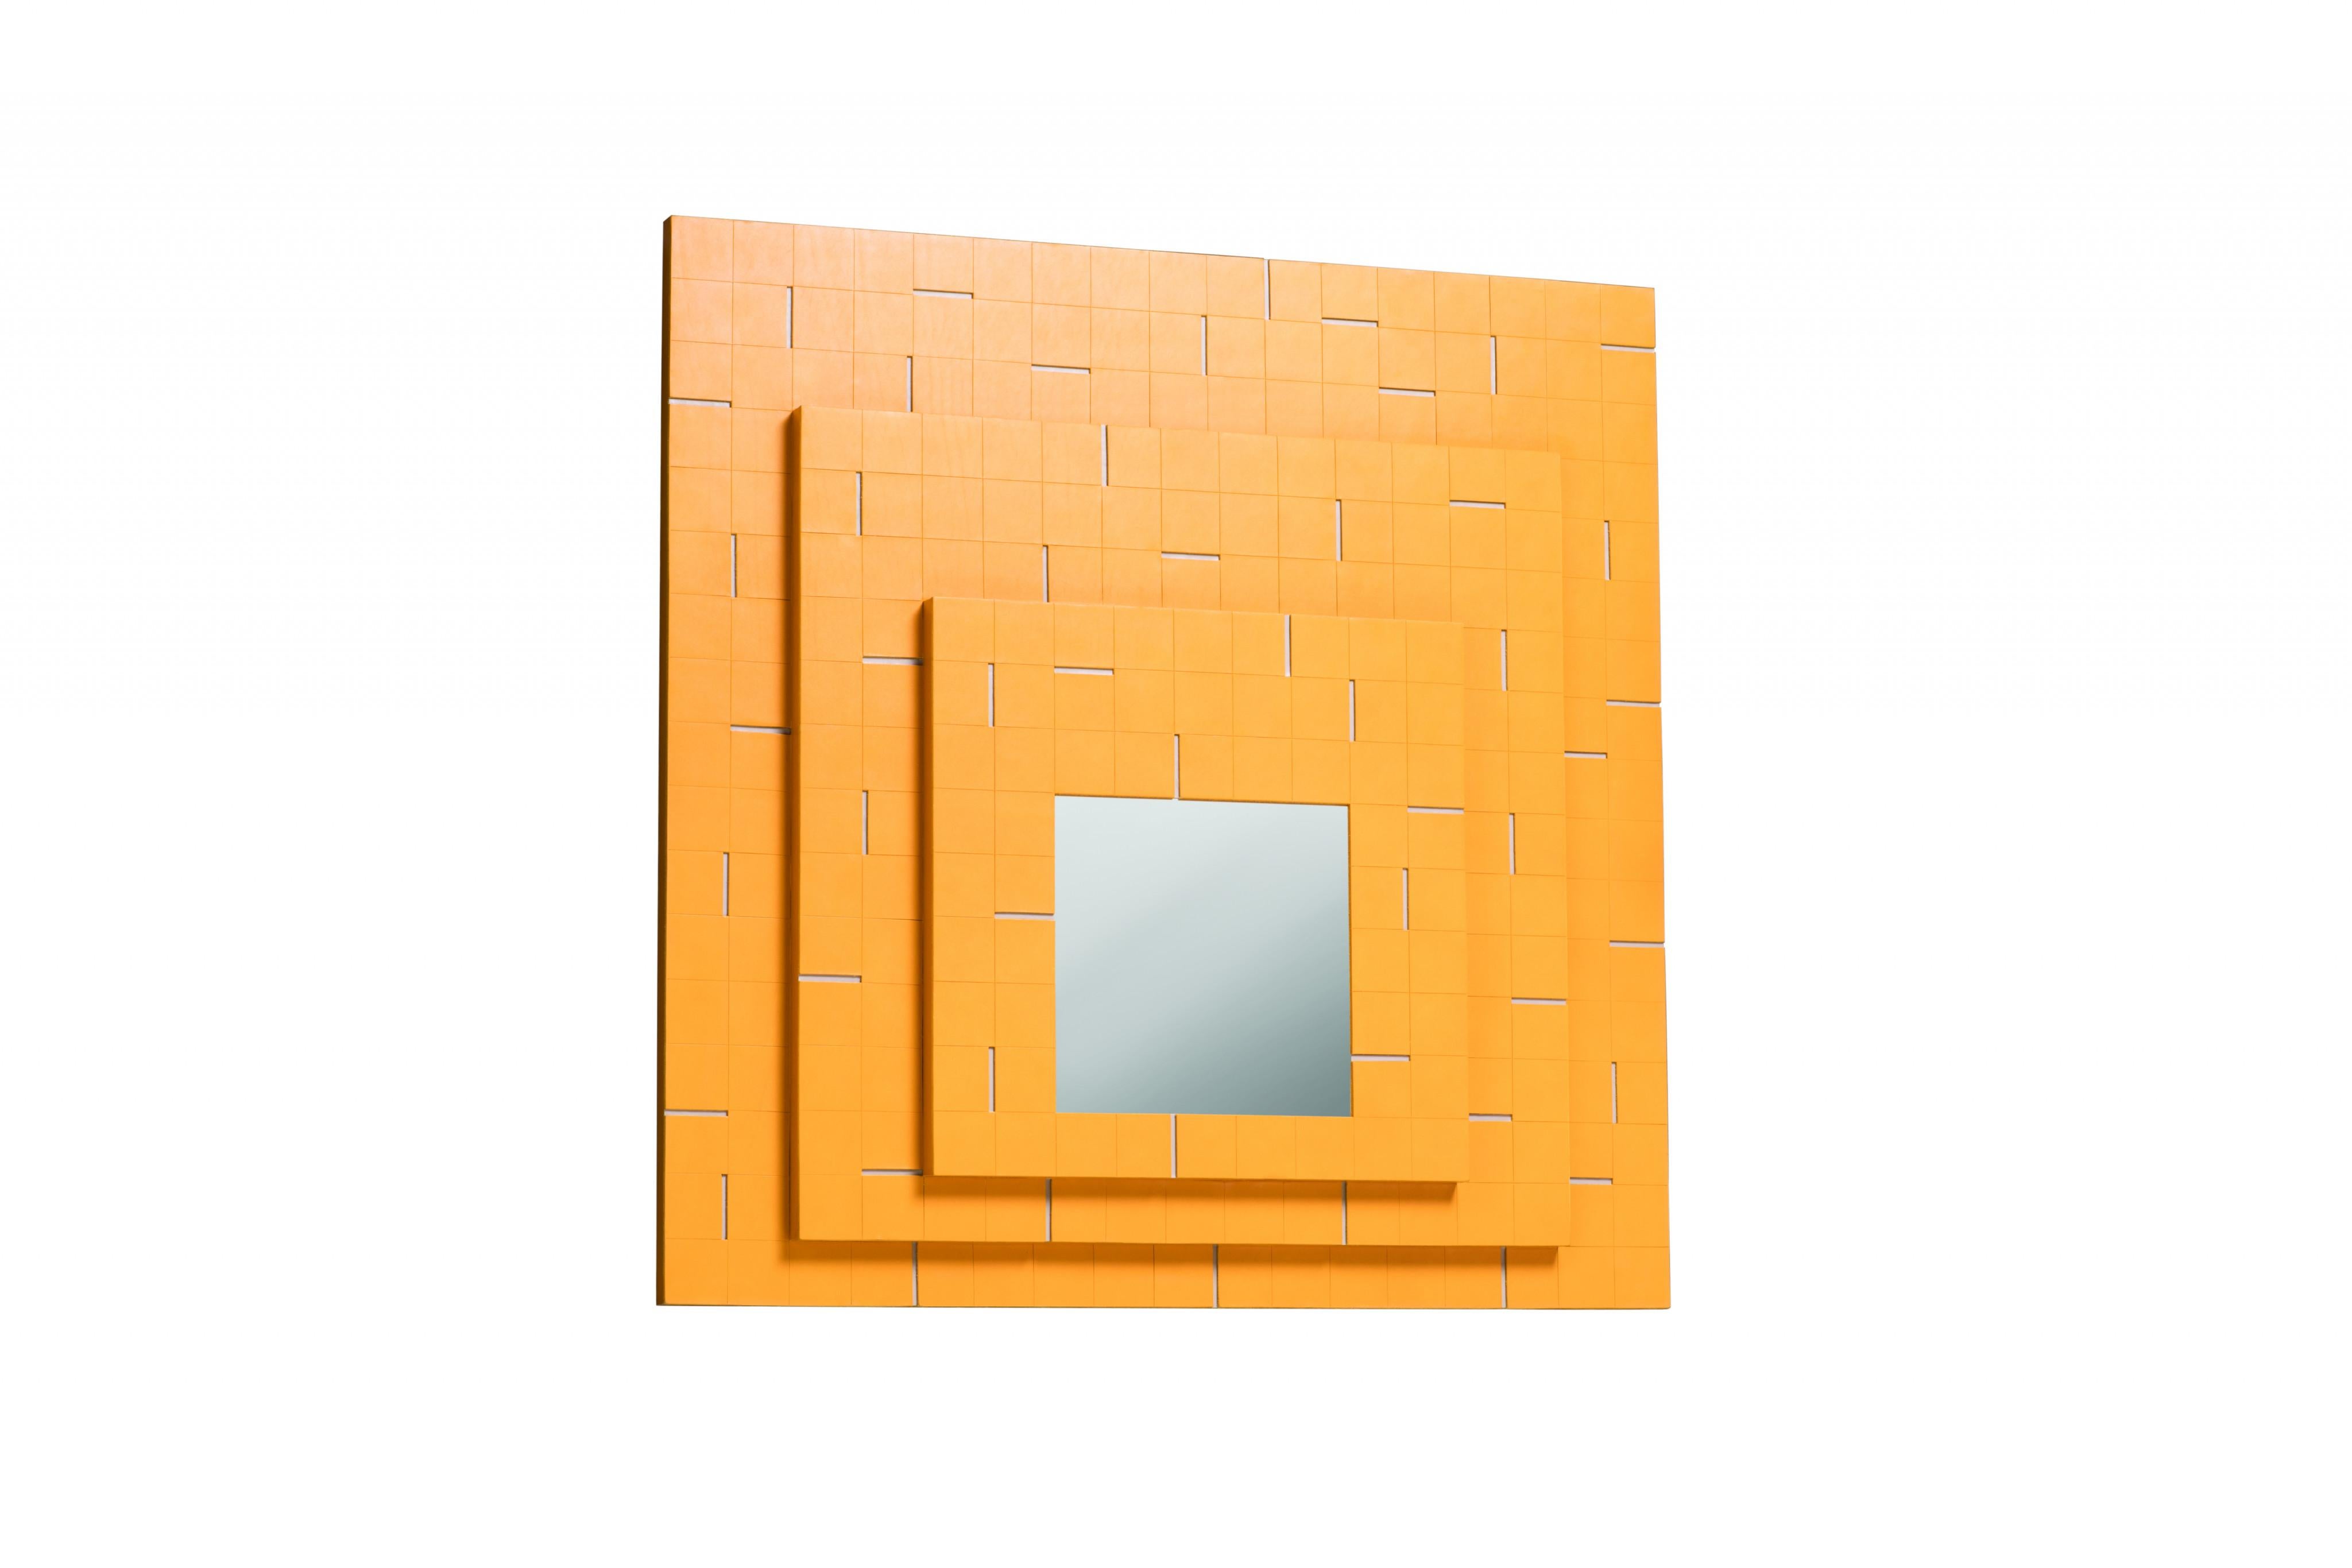 Atari Albers Mirror -- Stephane Parmentier x Giobagnara

Available only in saddle leather. See photo for recommended color combinations. Mirror itself measures 25x25 cm.

Embracing sleek designs and beautiful materials, the Stephane Parmentier